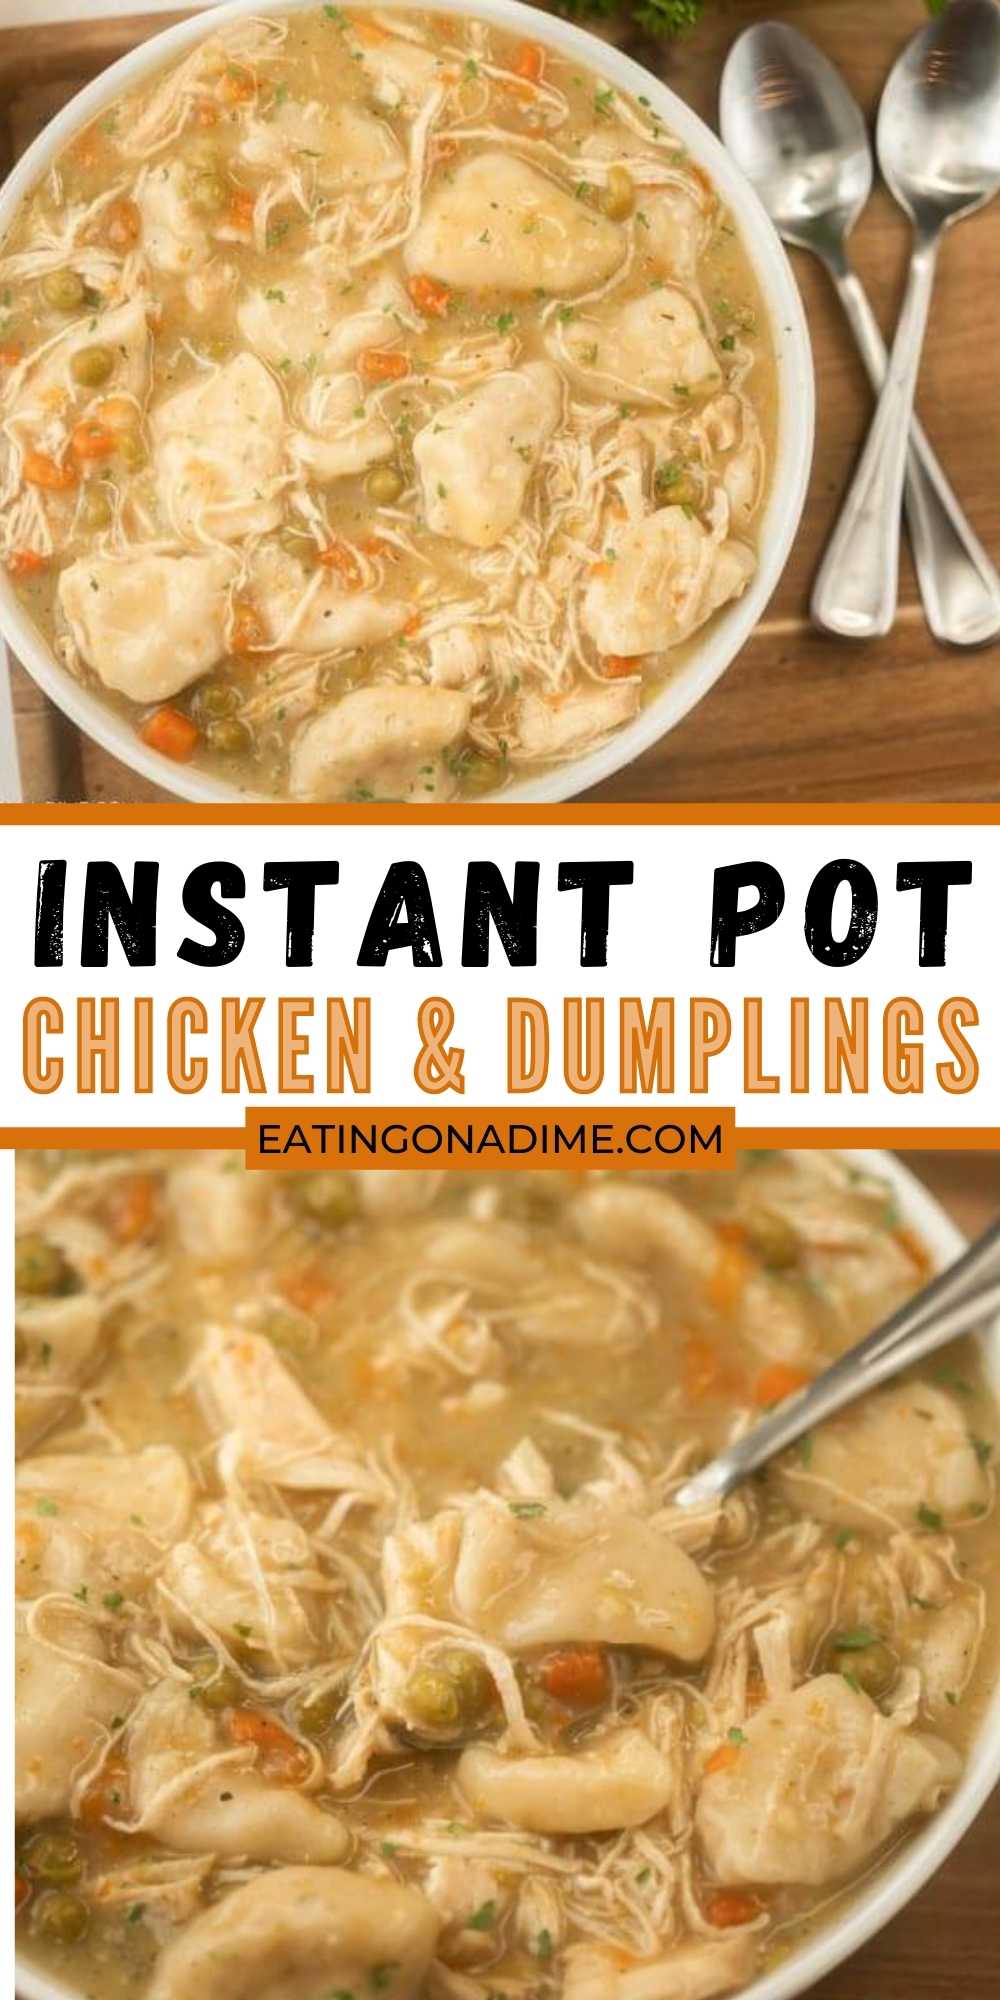 Instant Pot Chicken and Dumplings is an easy one pot meal that can be ready in 30 minutes in your Instant Pot! This simple creamy instant pot chicken and dumplings can be made with grands and frozen or fresh chicken!  The entire family will love it!  #eatingonadime #instantpotrecipes #chickenrecipes #chickenanddumplings 
